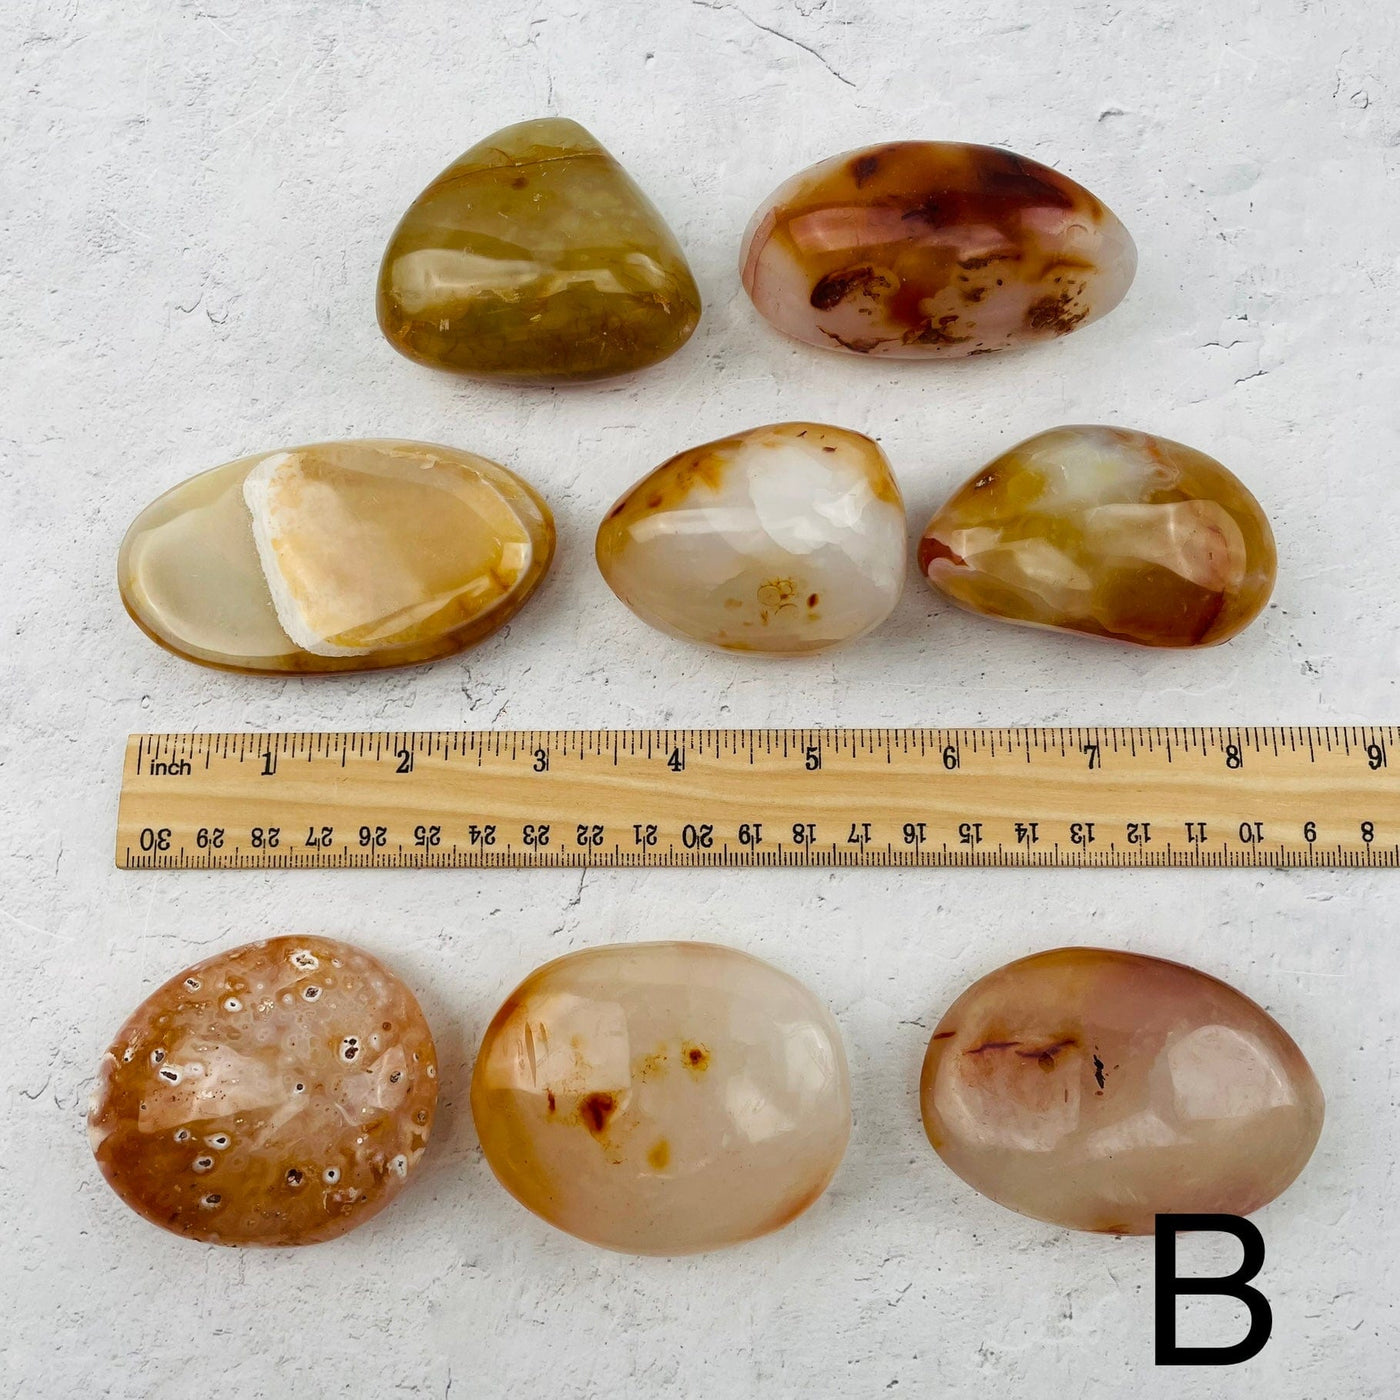 lot B comes with these eight palm stones